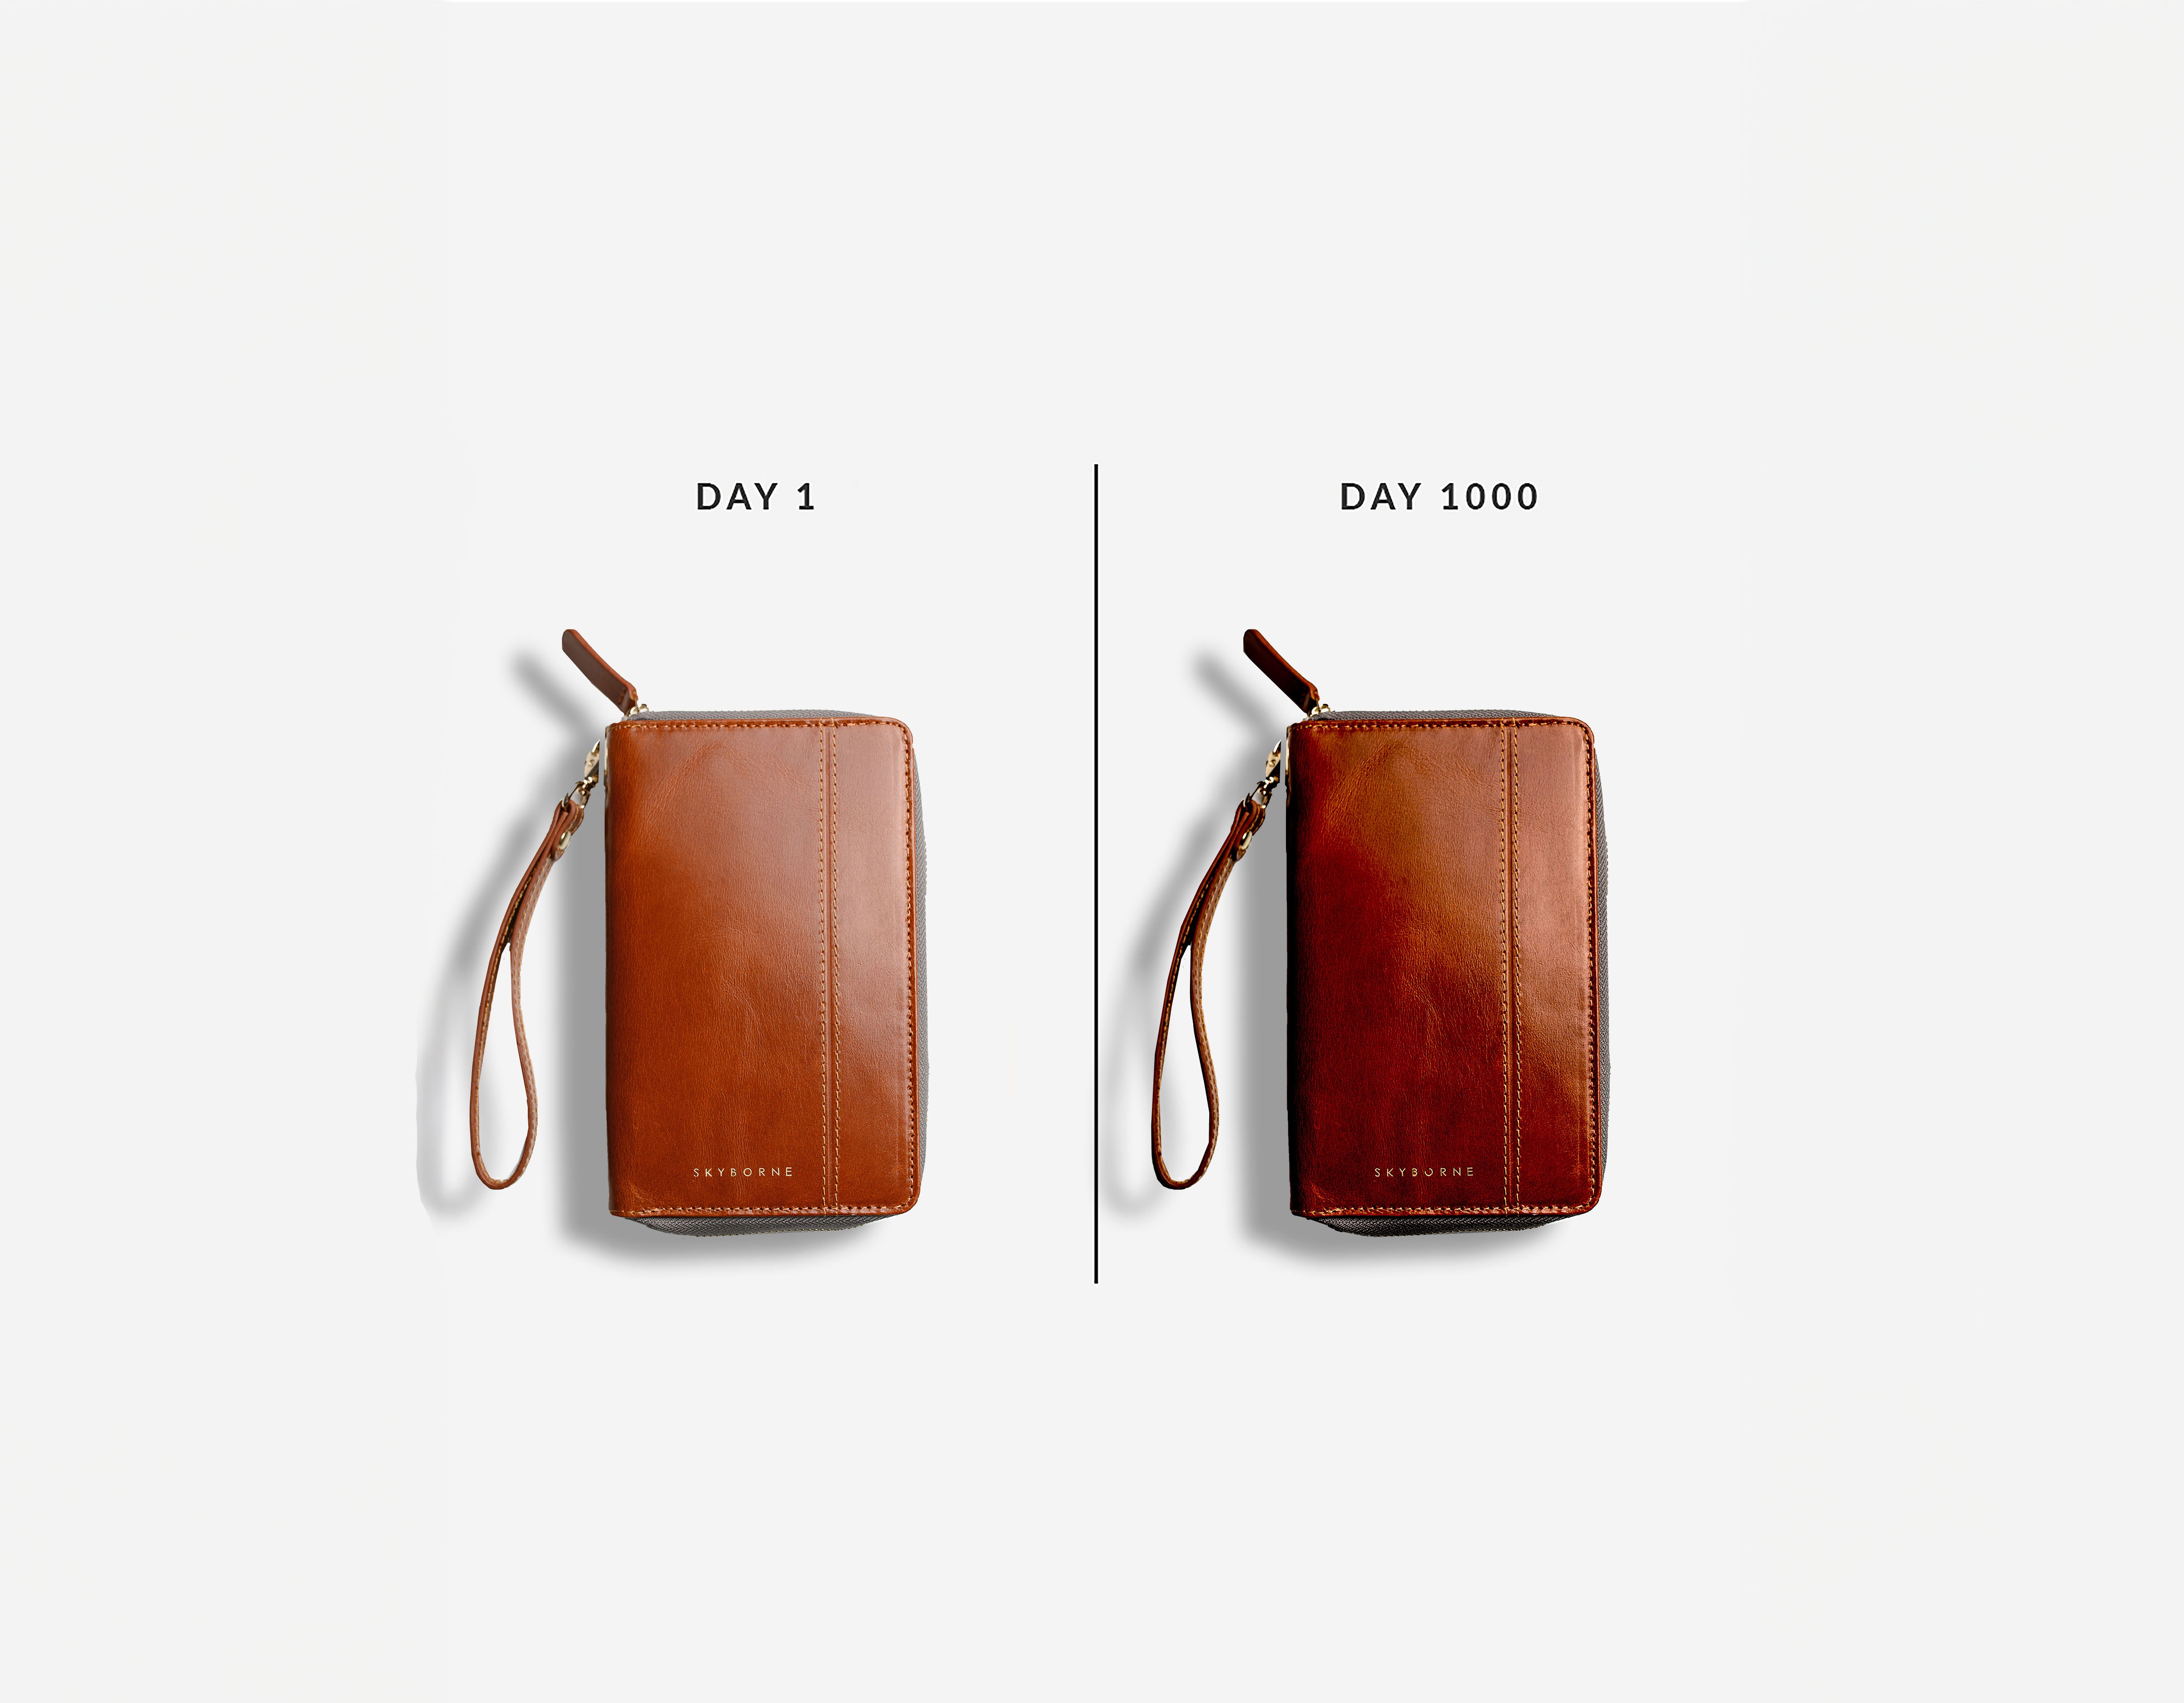 iTravel Folio 4.0: An innovative travel organizer with built-in